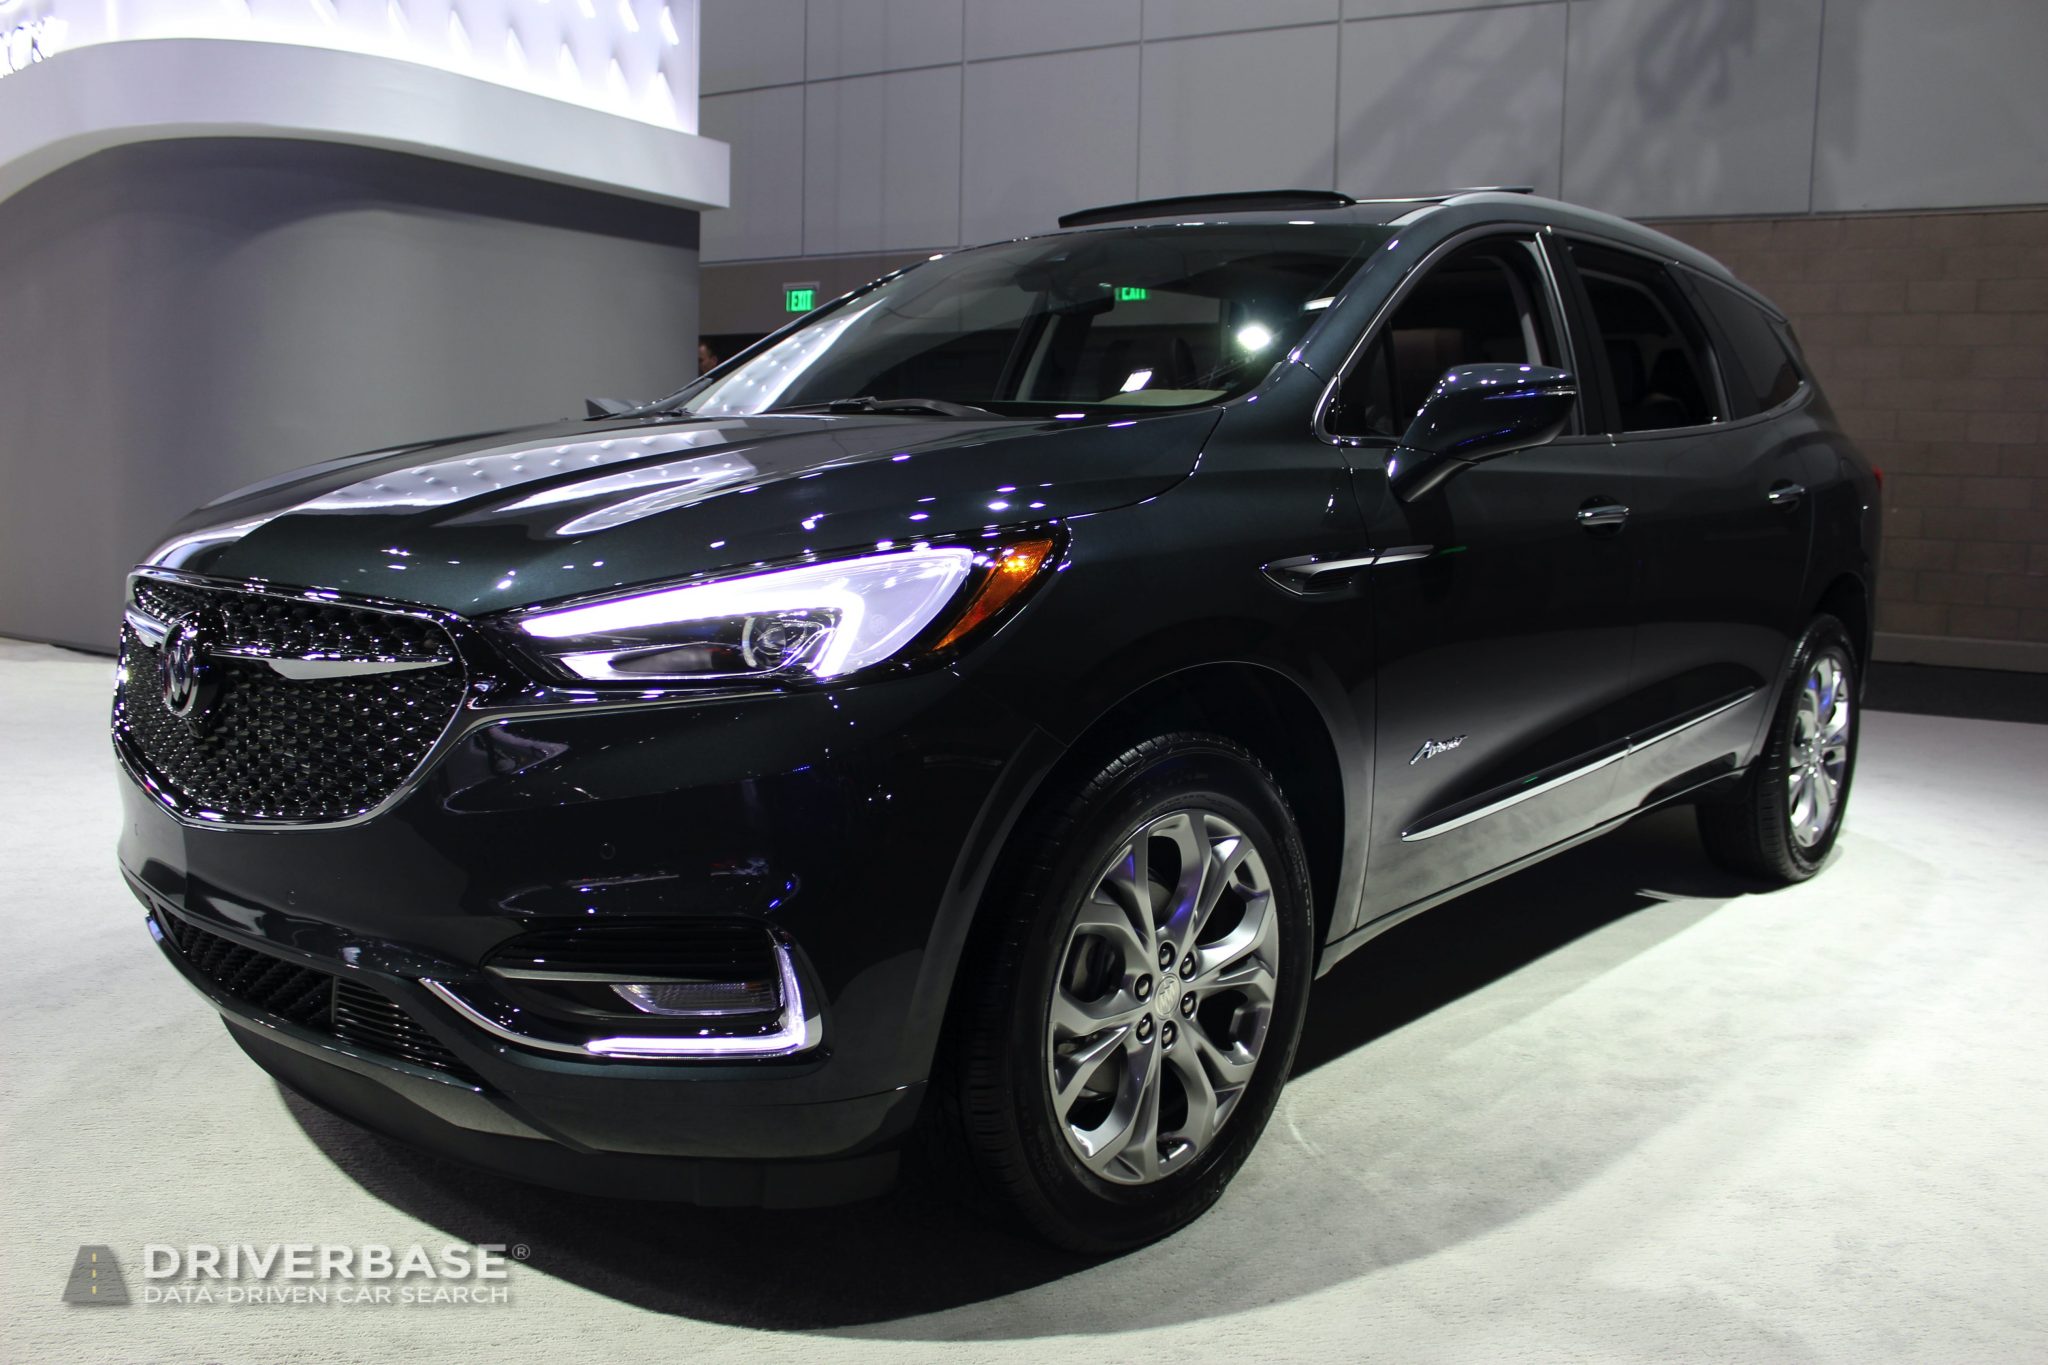 2020 Buick Enclave at the 2019 Los Angeles Auto Show